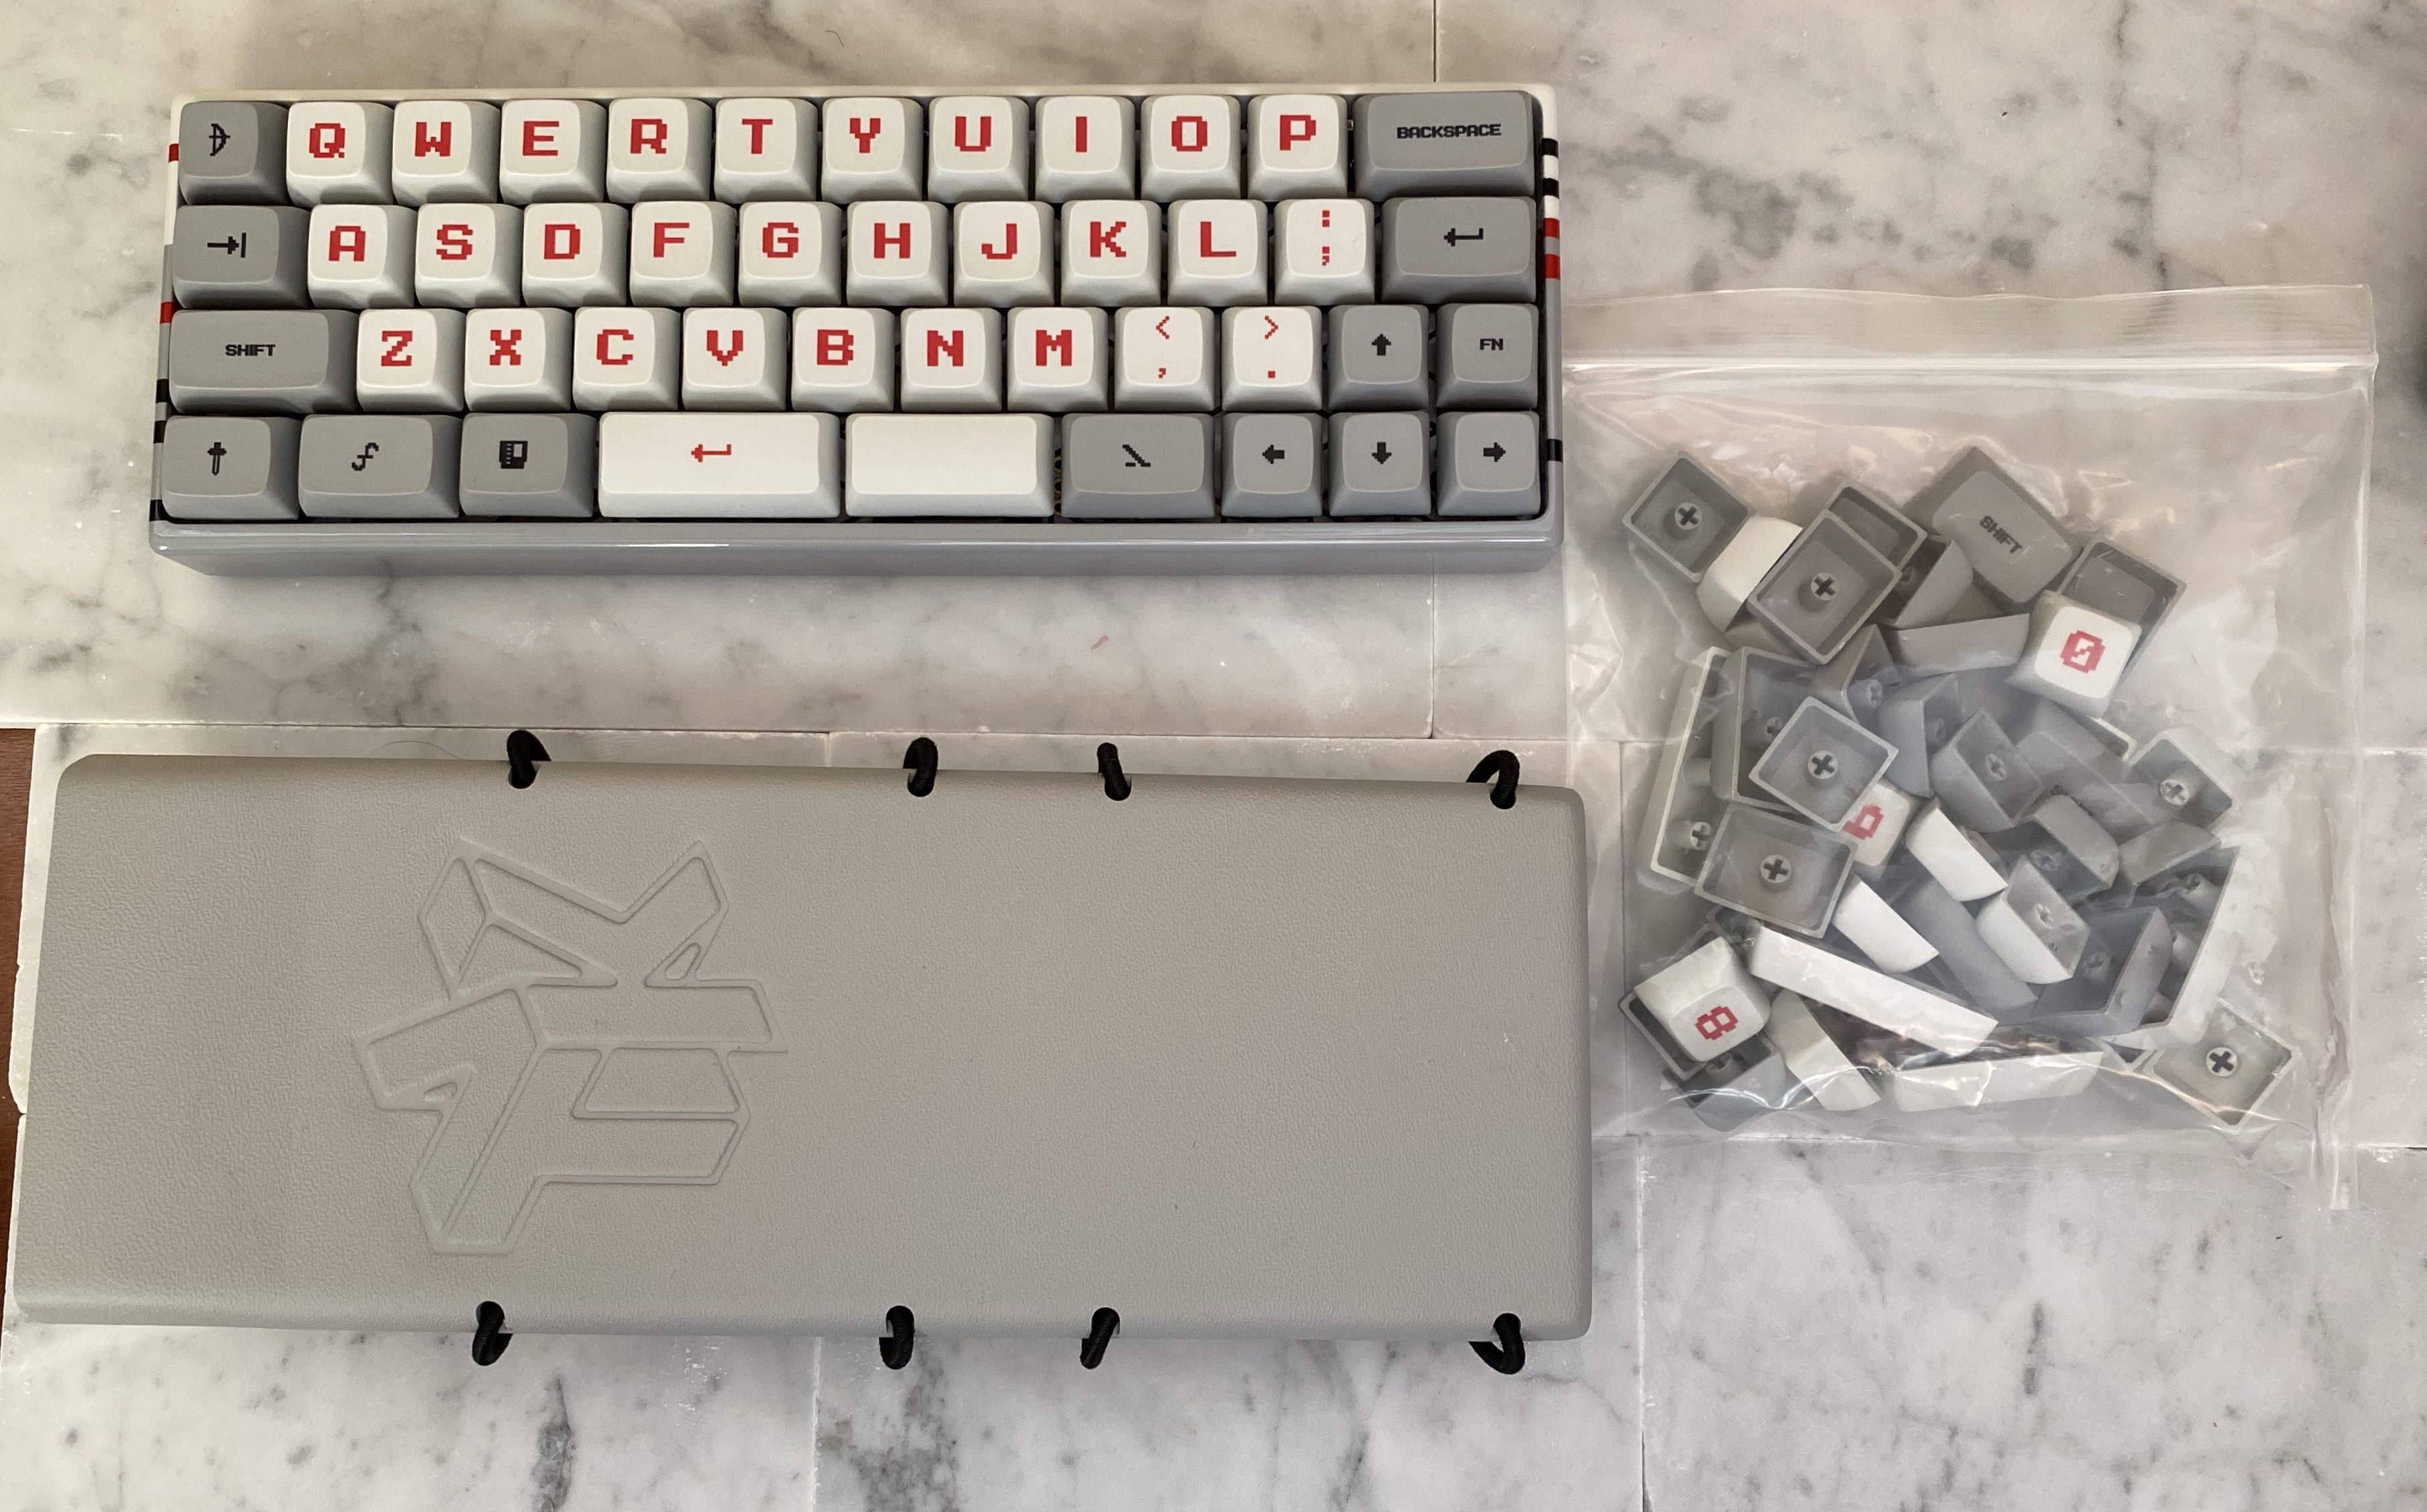 XDA 8-Bit on a MiniVan in a limited edition painted aluminum case with a matching Holster